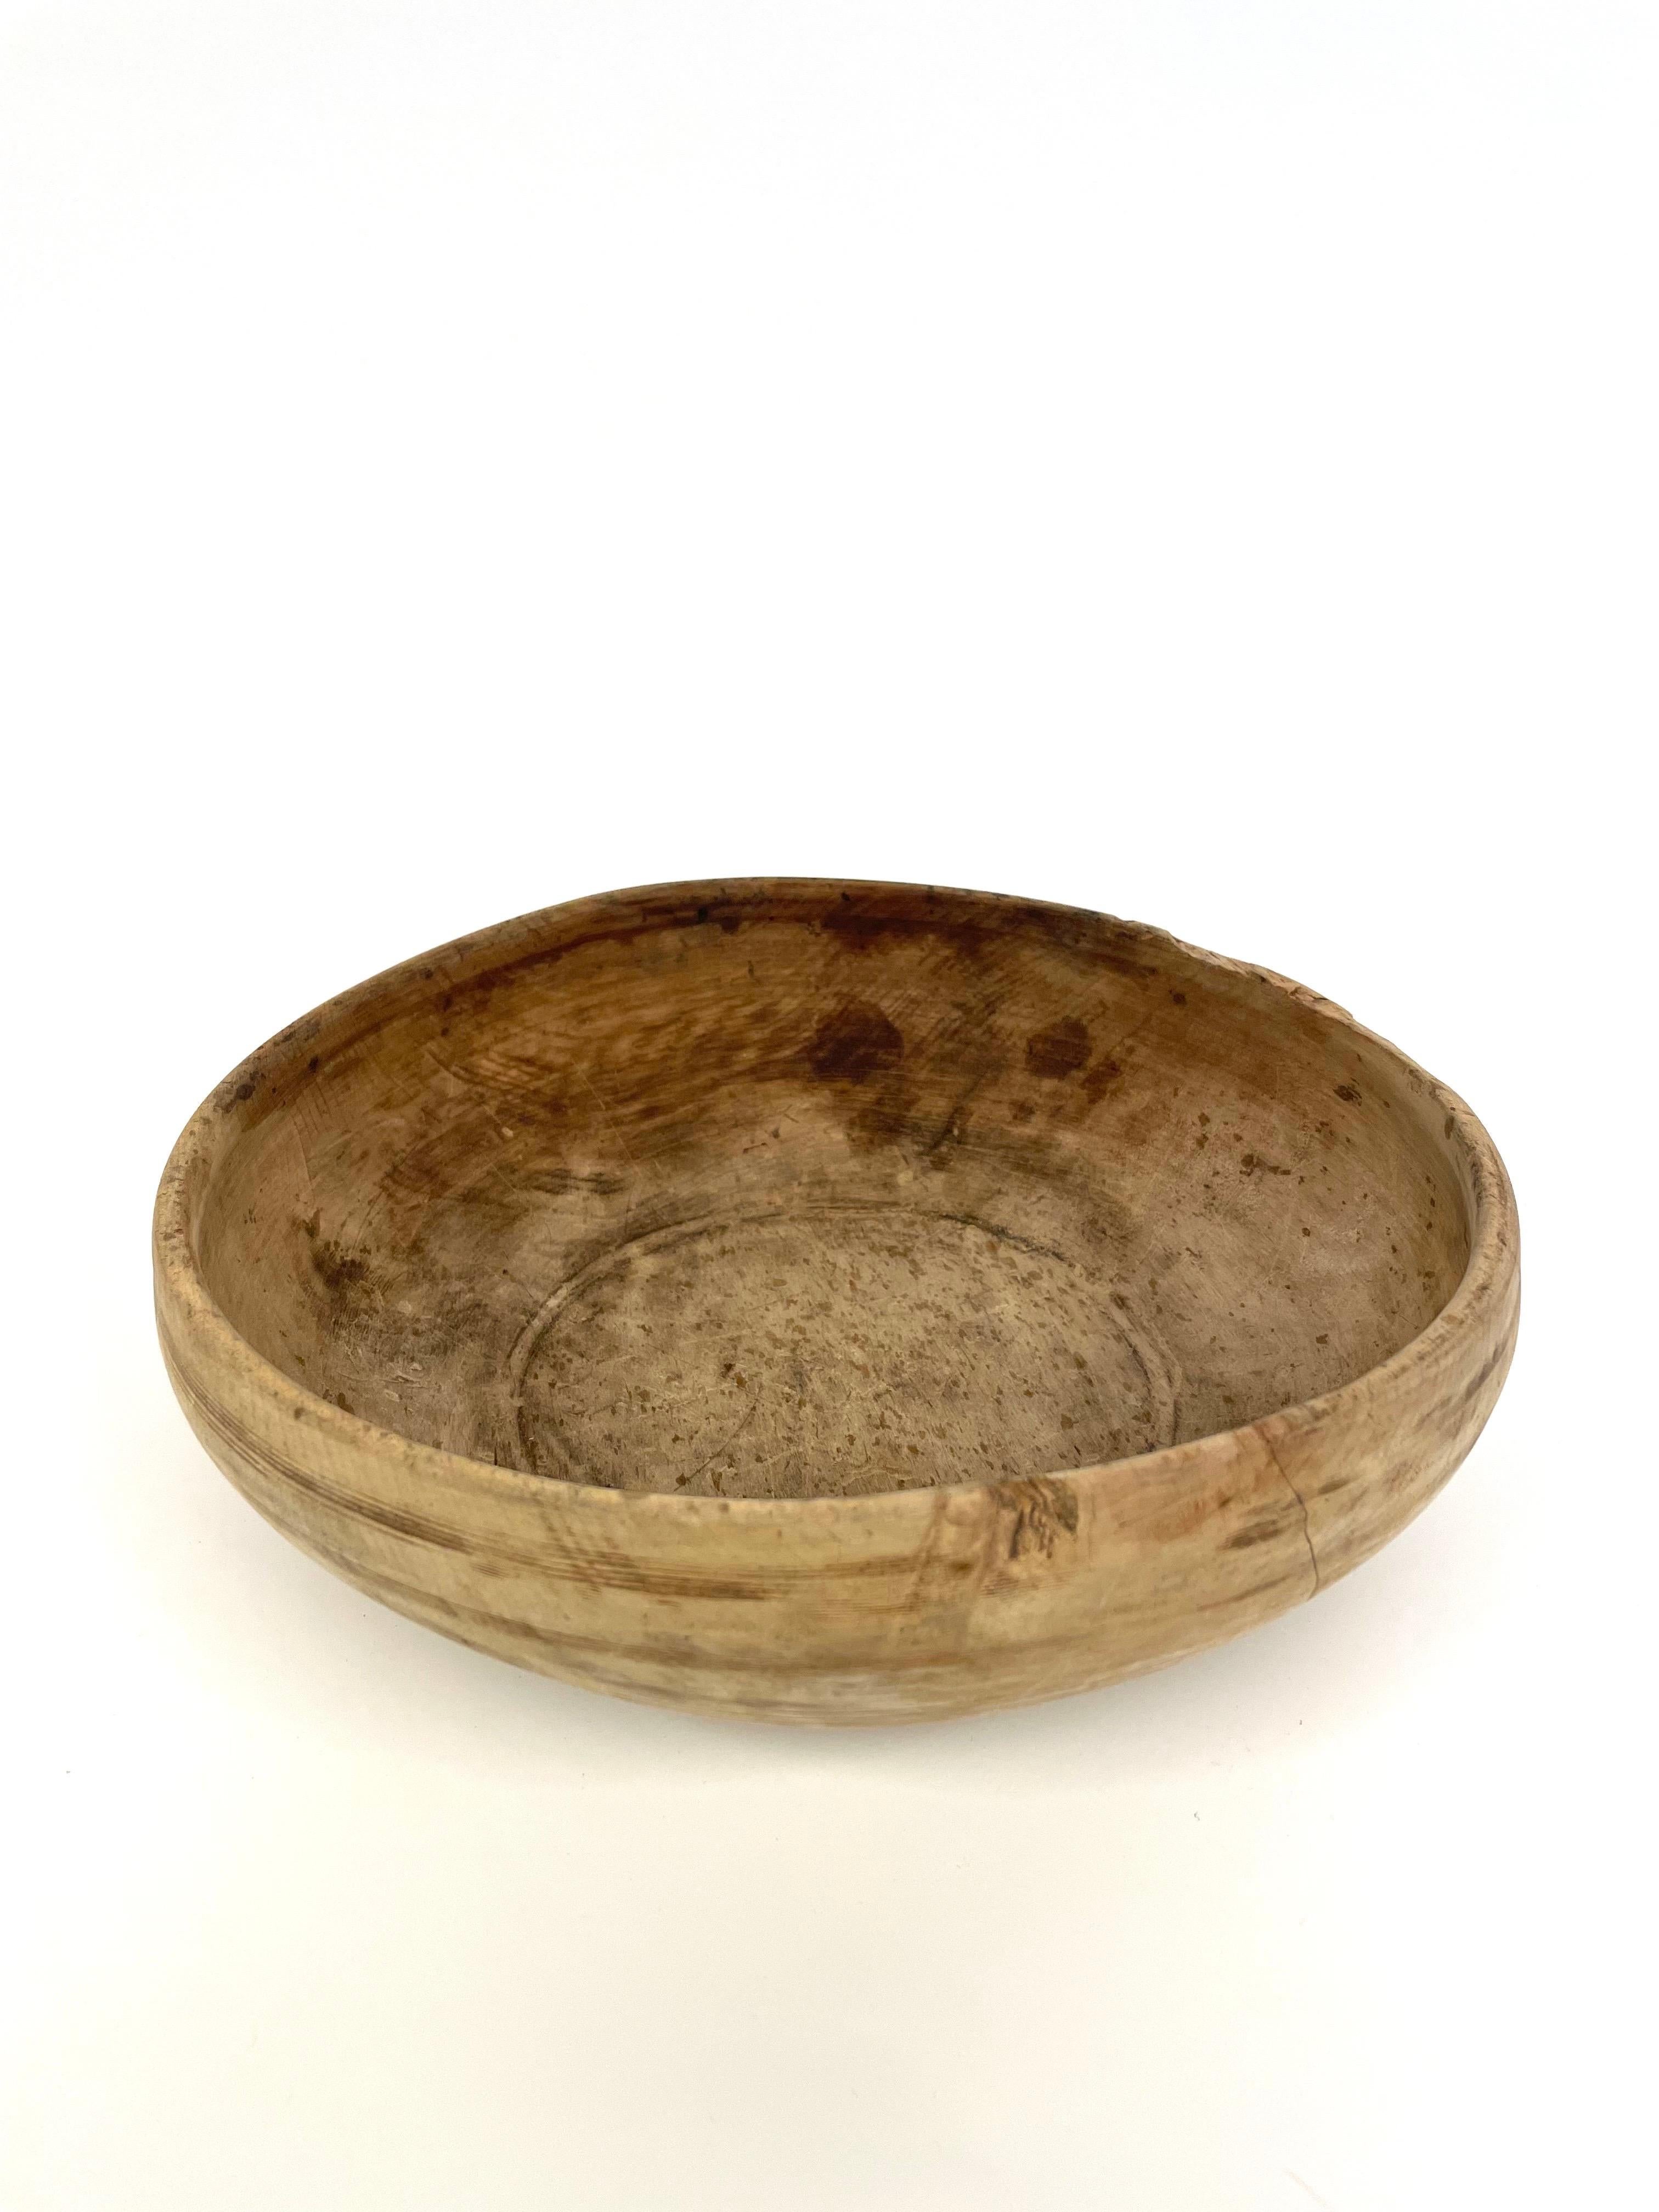 This is a very beautiful Swedish hand-carfted 19th century wooden bowl in Wabi Sabi style. 
It comes made in pine with lovely patina reflecting its age and frequent use.
It has a few decorative longitudinal turned lines. 